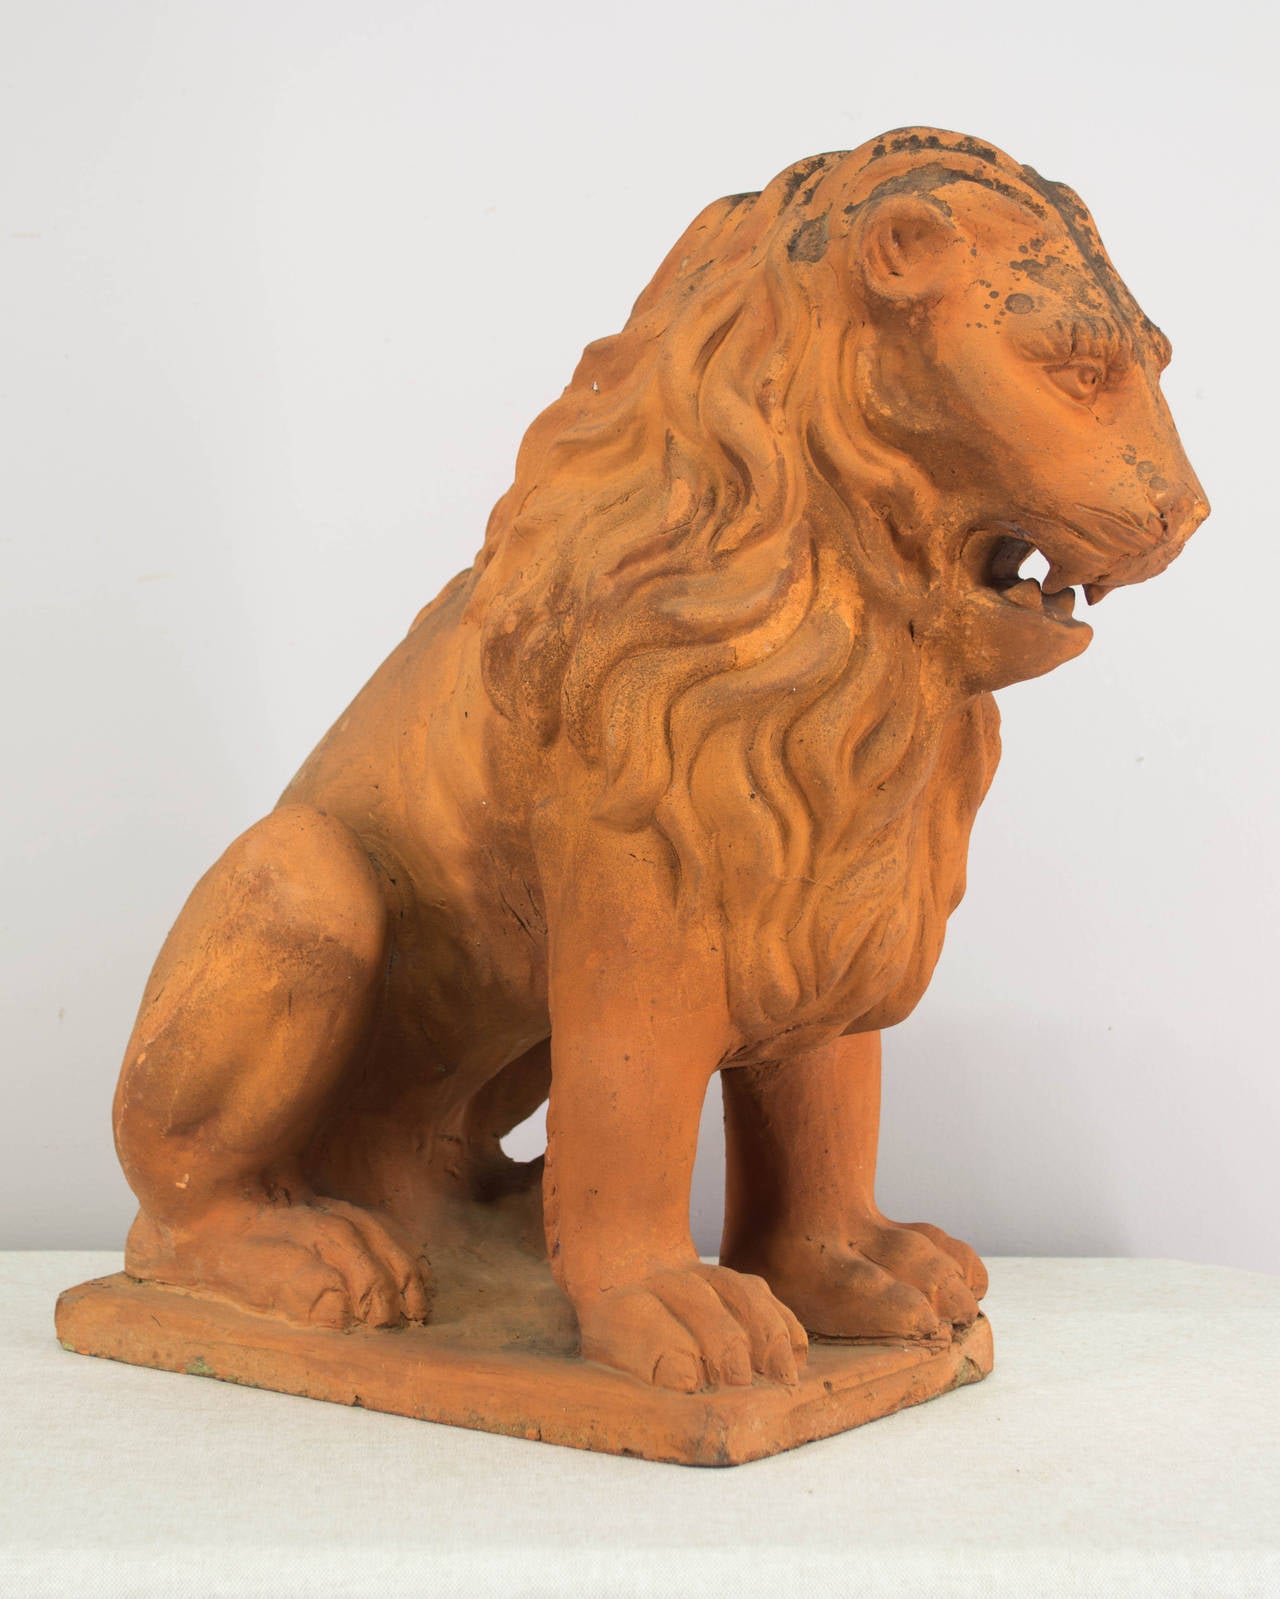 19th century French terracotta lion, with nicely detailed mane and old mossy patina. A stately sculpture to grace your front entry or garden. In good condition with no restoration. As always, more photos available upon request. We have a large